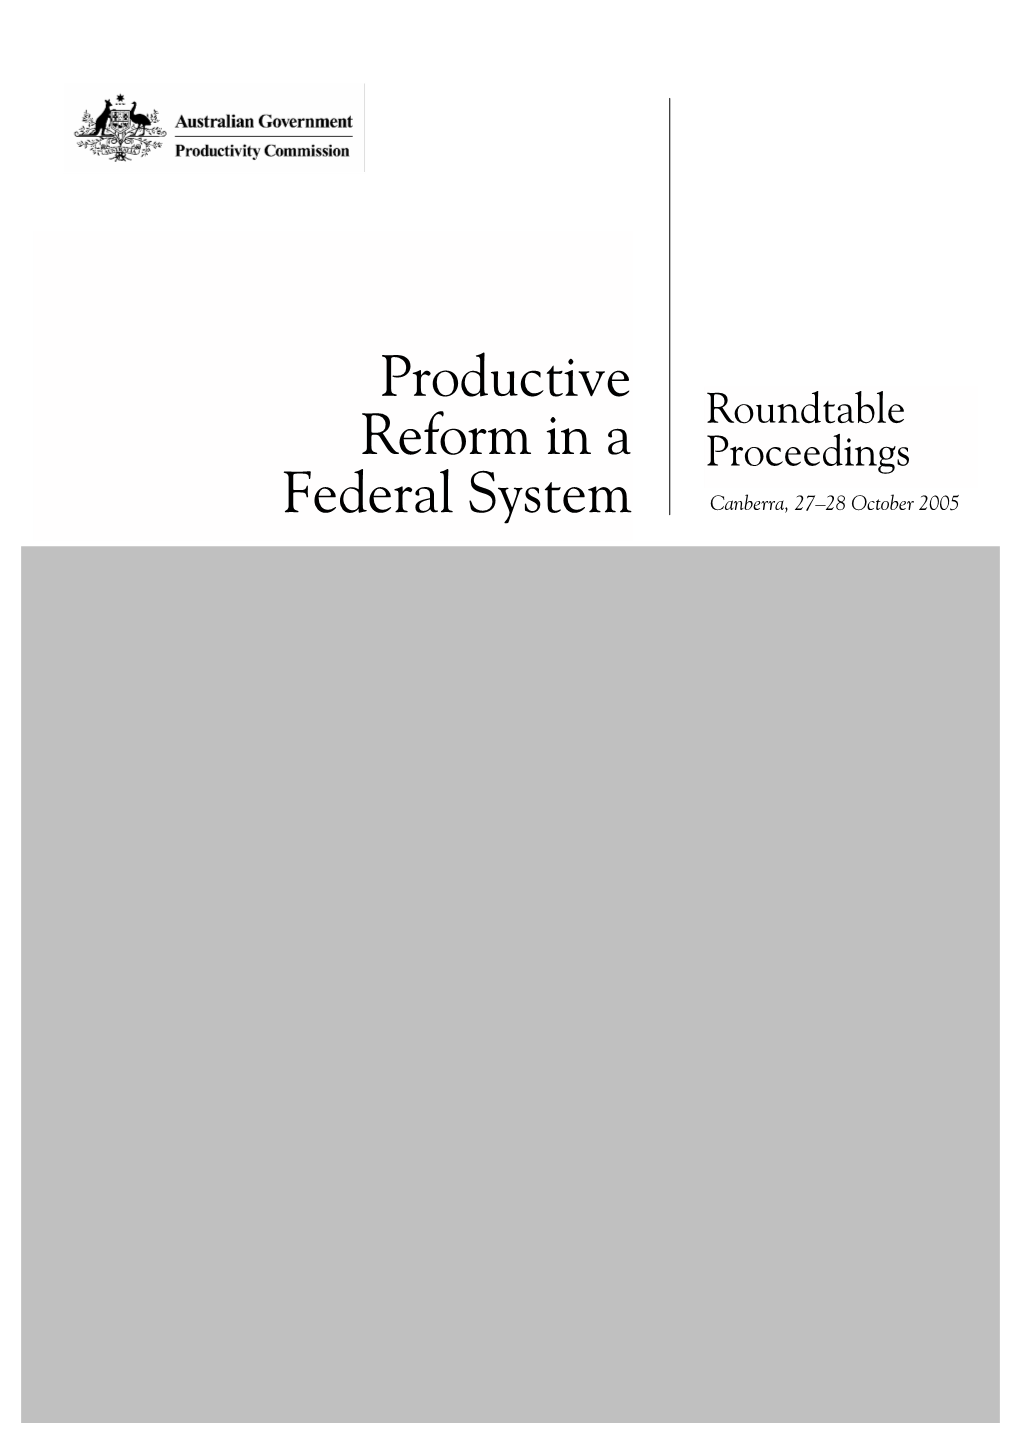 Productive Reform in a Federal System, Roundtable Proceedings, Productivity Commission, Canberra